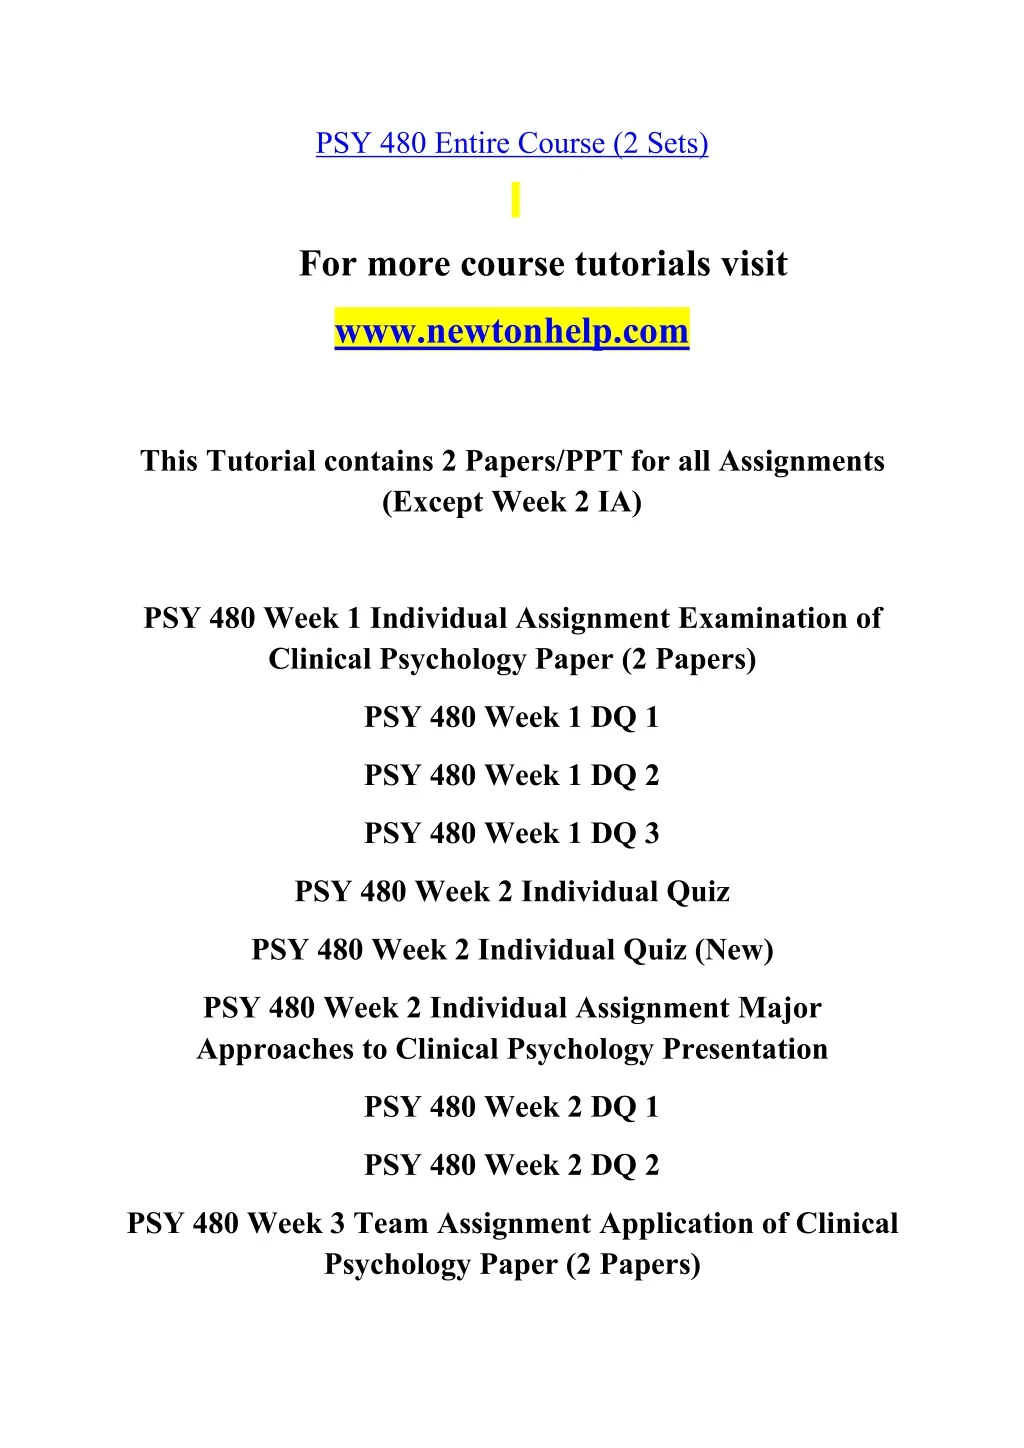 psy 480 entire course 2 sets